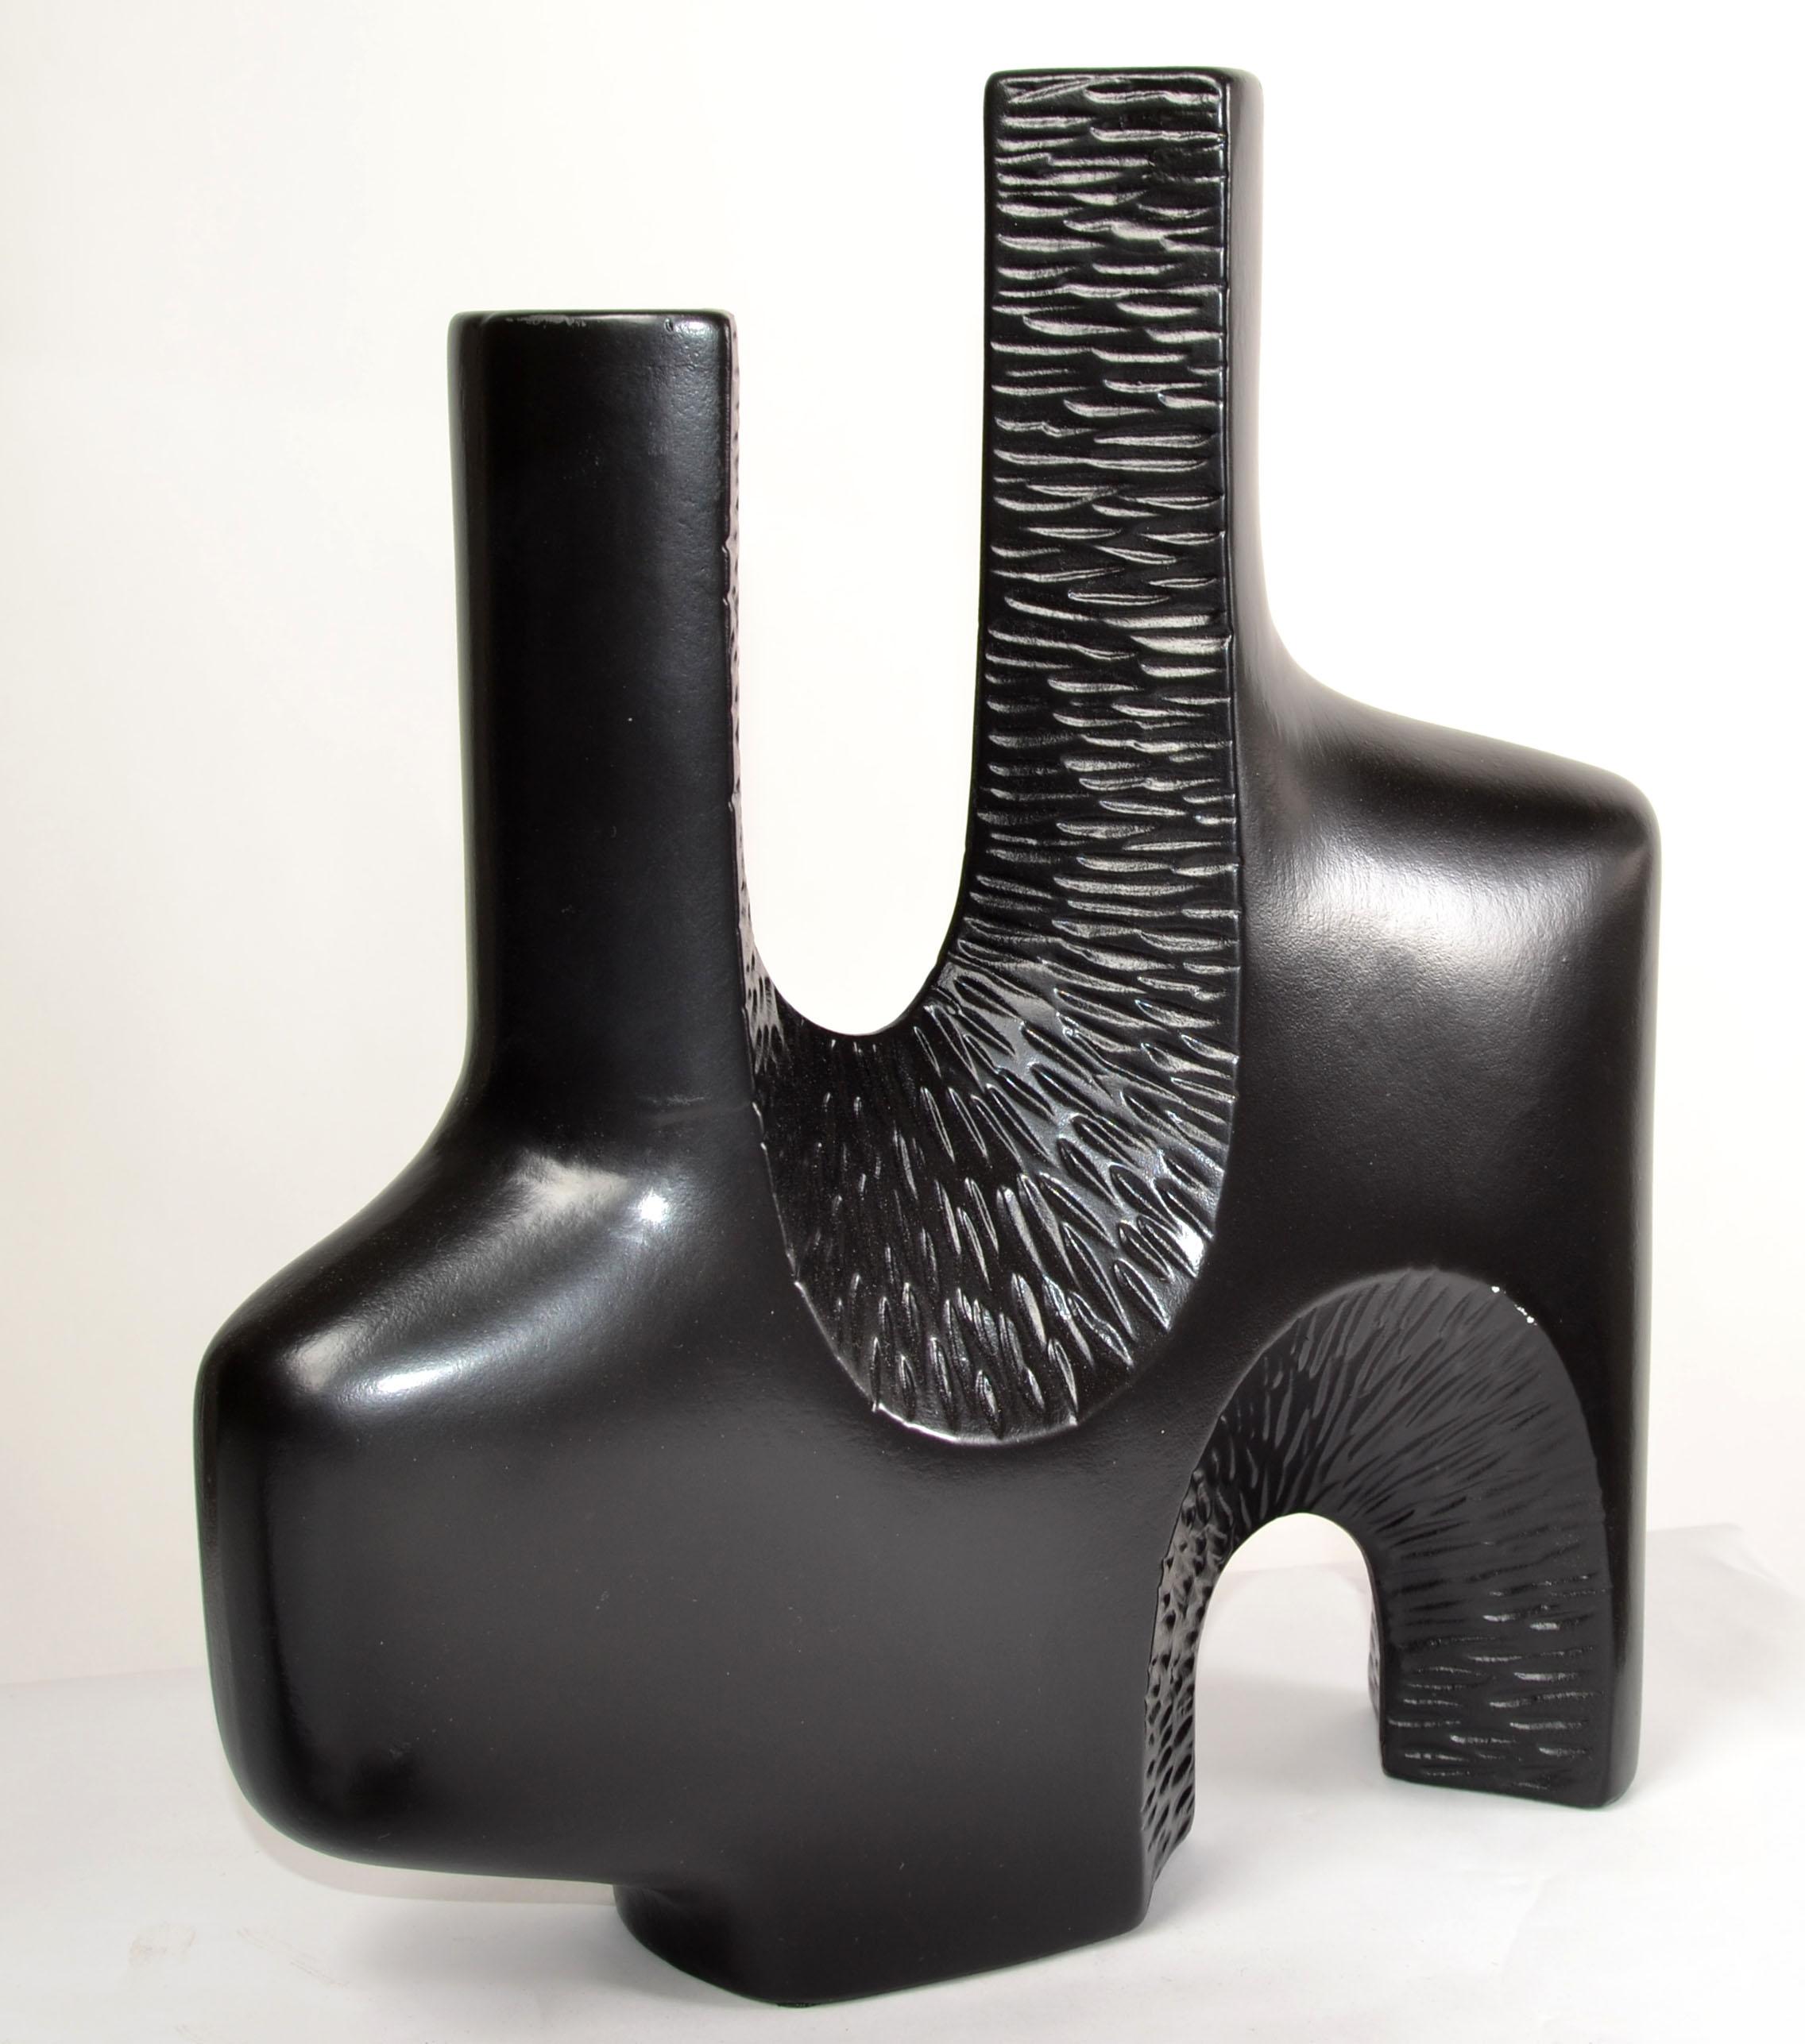 Organic Modern 1980s Abstract Textured Two Neck Vase Vessel Black Finish Mid-Century Modern For Sale